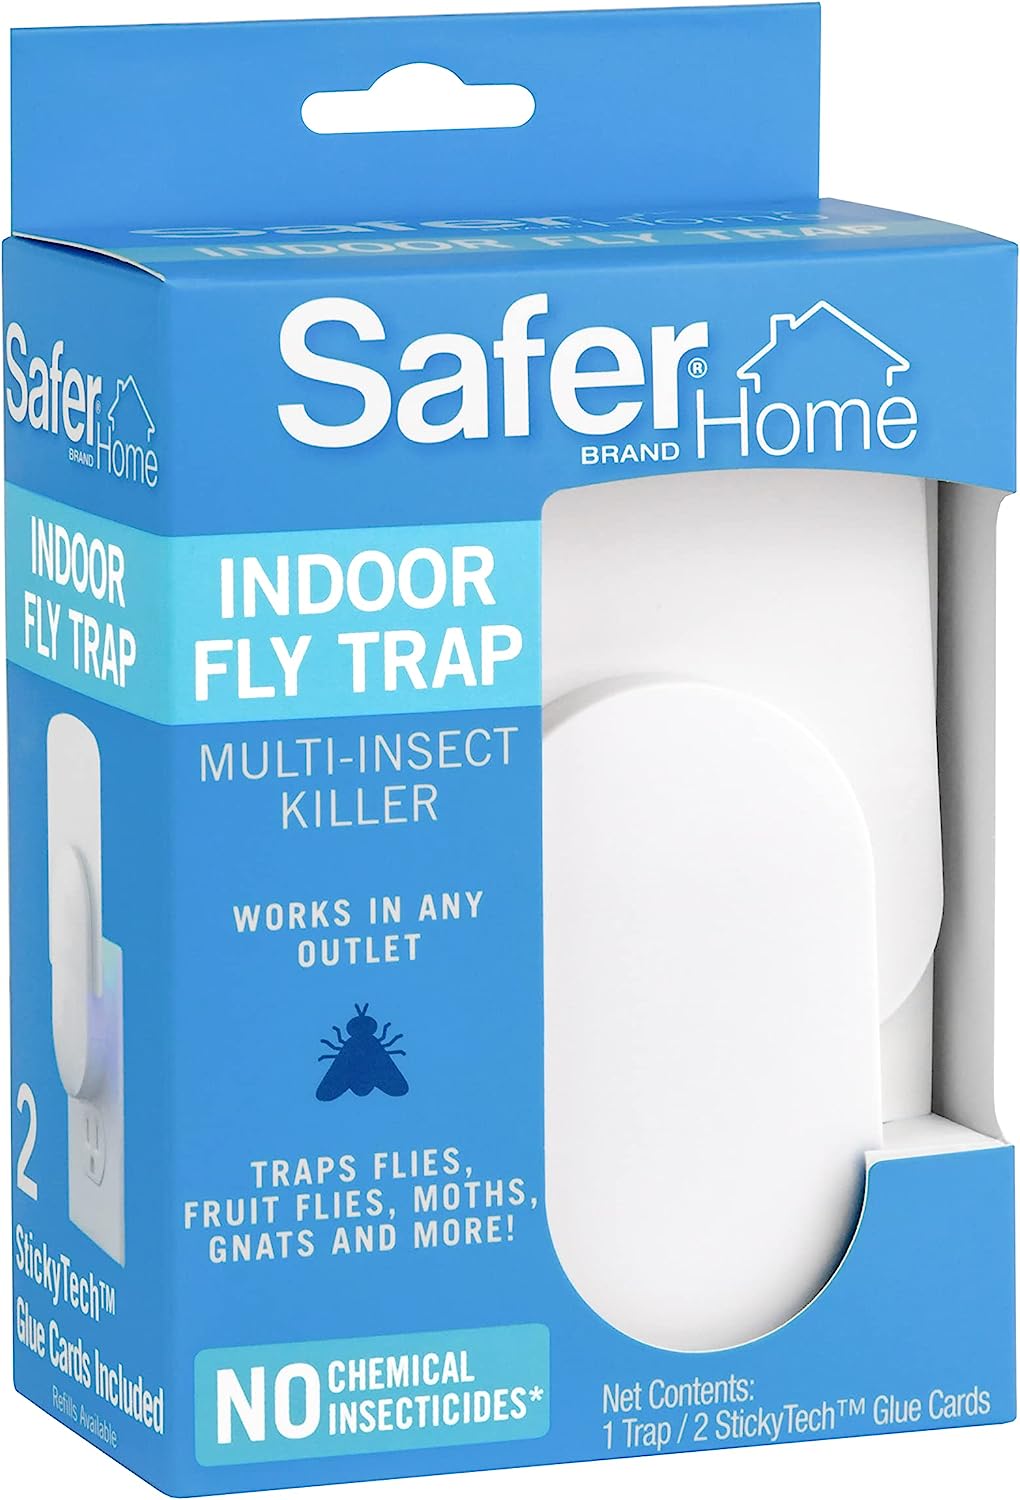 Wholesale prices with free shipping all over United States Safer Home SH502 Indoor Plug-In Fly Trap for Flies, Fruit Flies, Moths, Gnats, and Other Flying Insects – 400 Sq Ft of Protection - Steven Deals